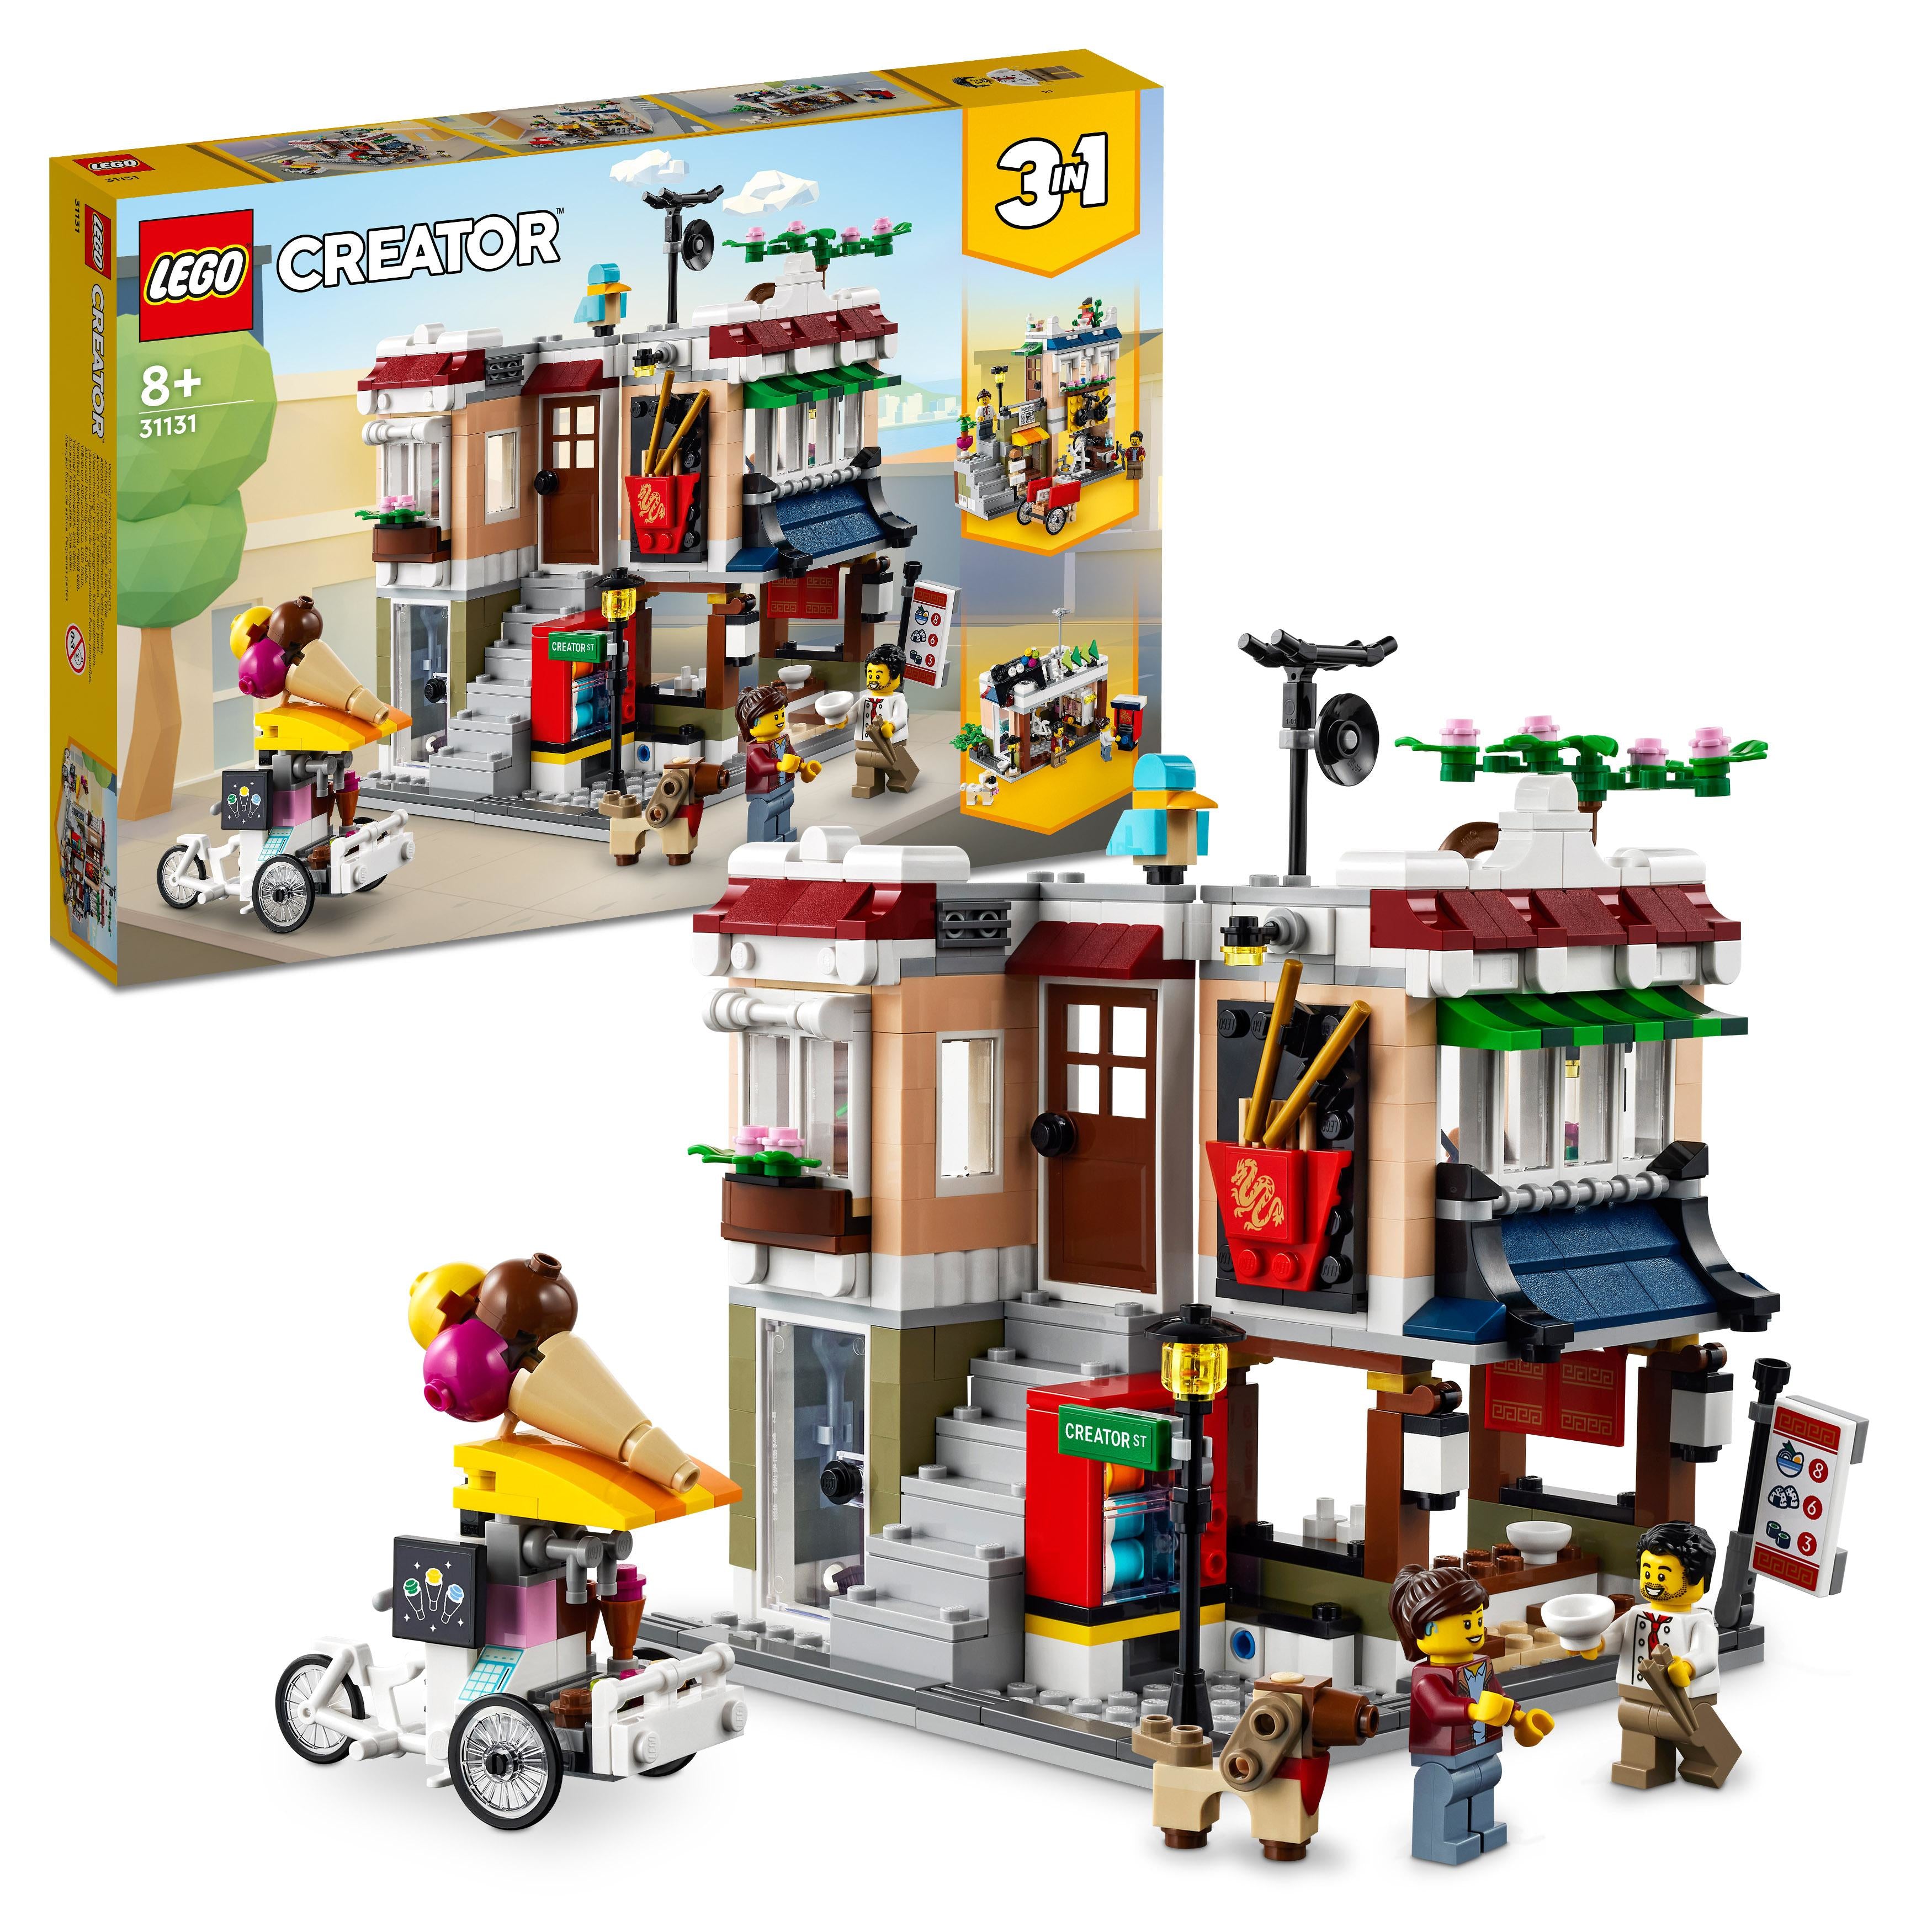 LEGO Creator 3in1 Downtown Noodle Building 31131 –